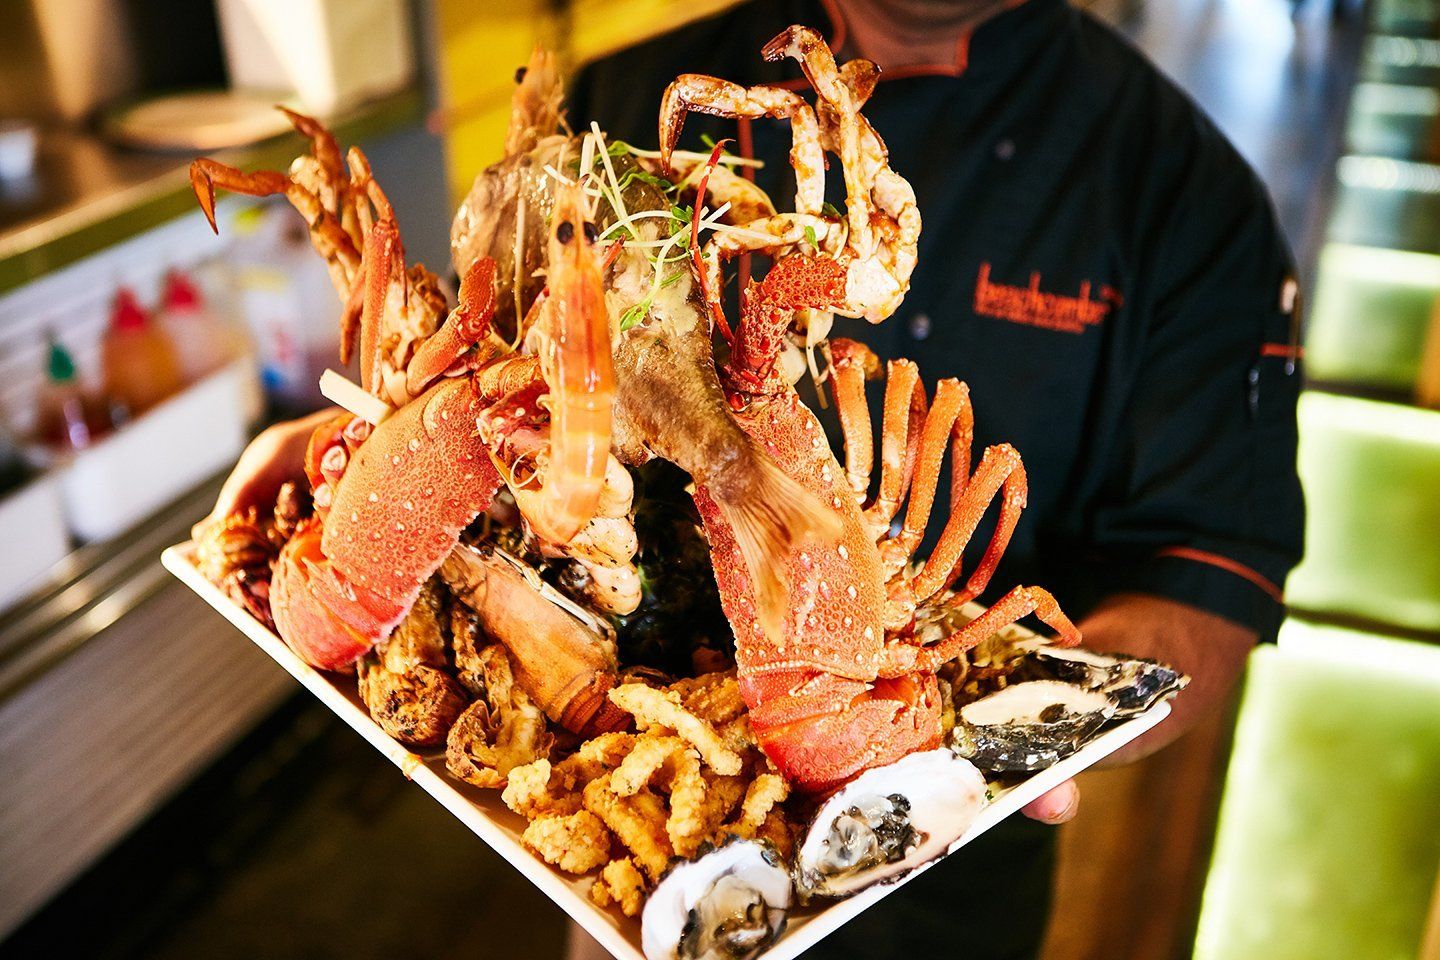 A chef is holding a plate of seafood and french fries.